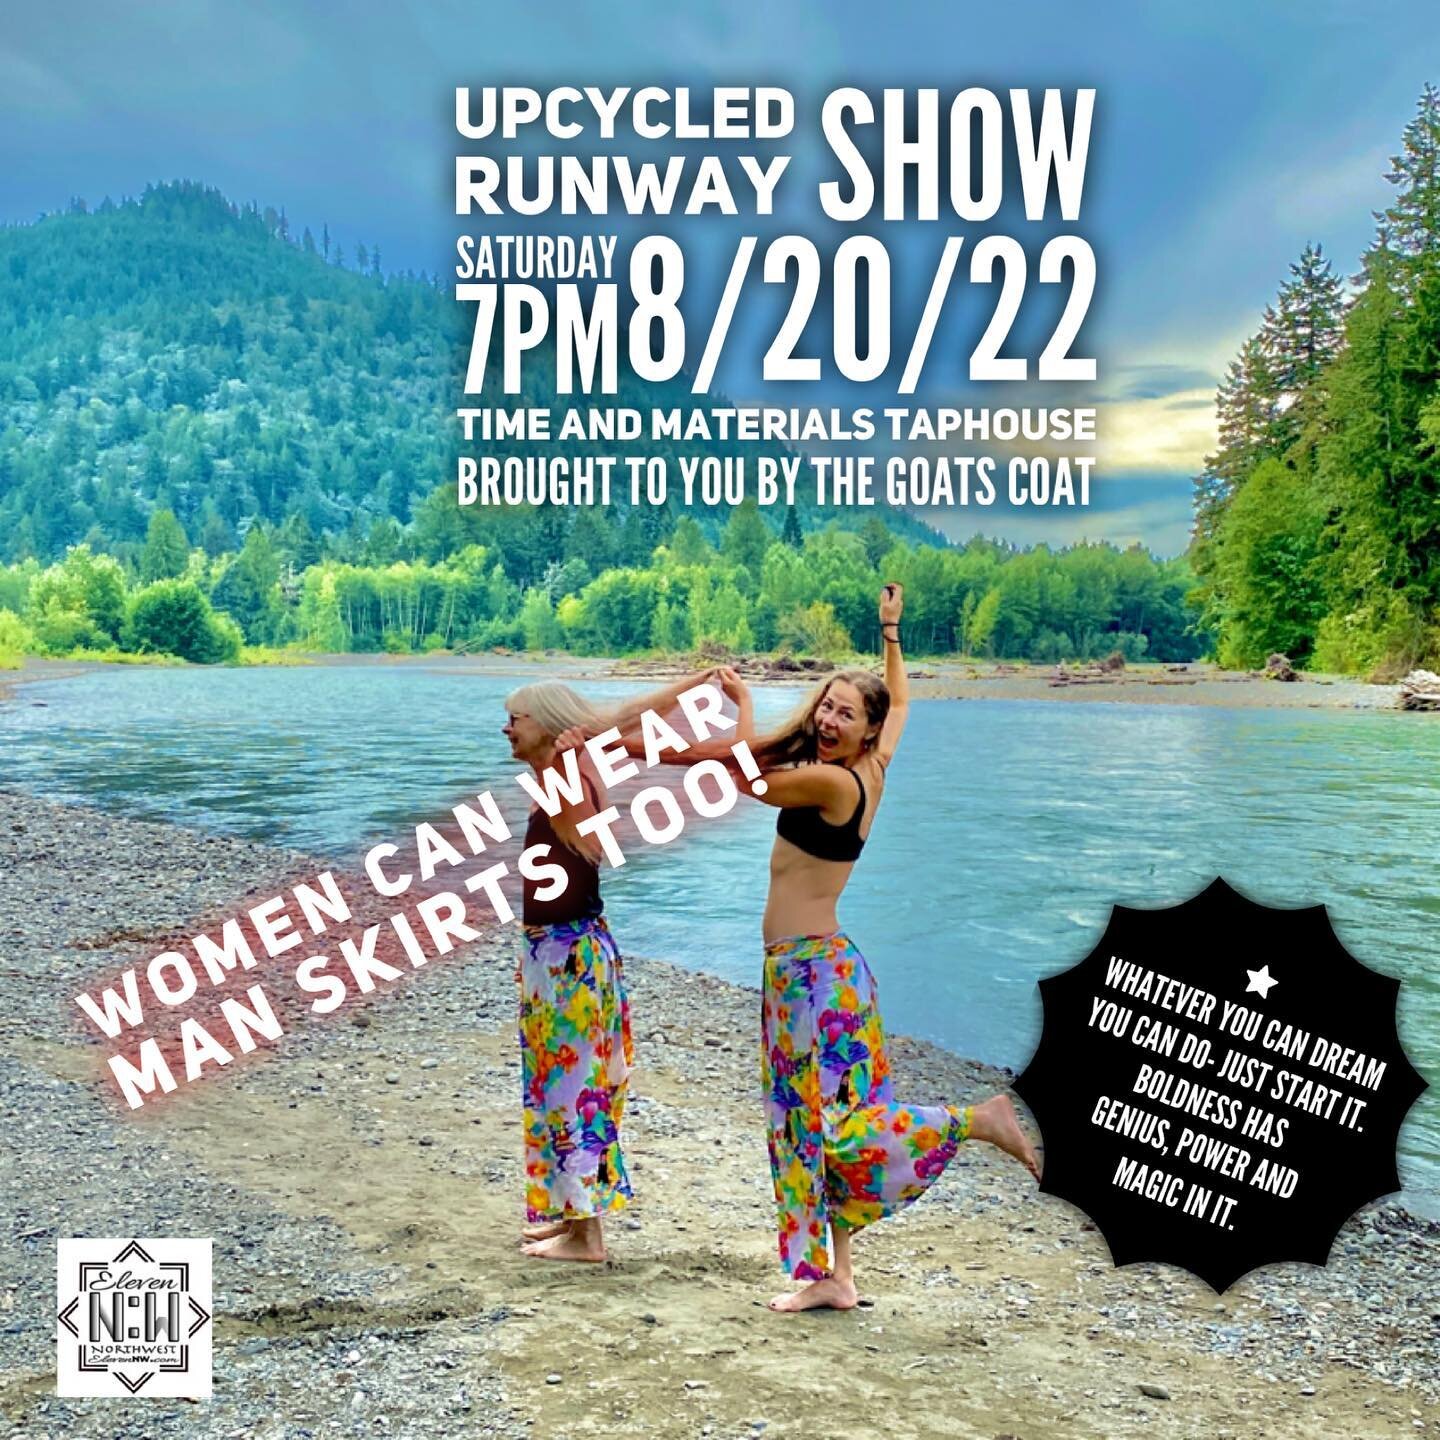 Upcycled daydreams&hellip;. Eco-minded sustainable fashion from all kinds of cool creative designers- If you want a seat you gotta buy a VIP ticket. Hoping the show sells out&hellip;. Go to @thegoatscoat for tickets and details. Please and thanks!